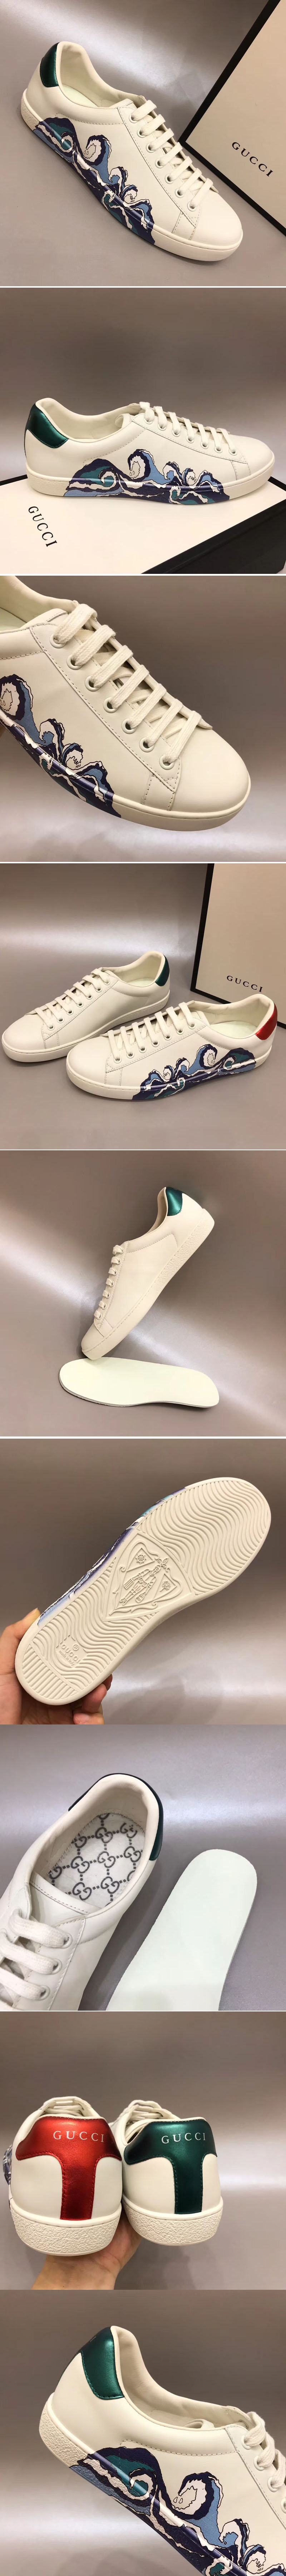 Replica Gucci Ace sneaker with Interlocking G Shoes Women and Mens White Leather